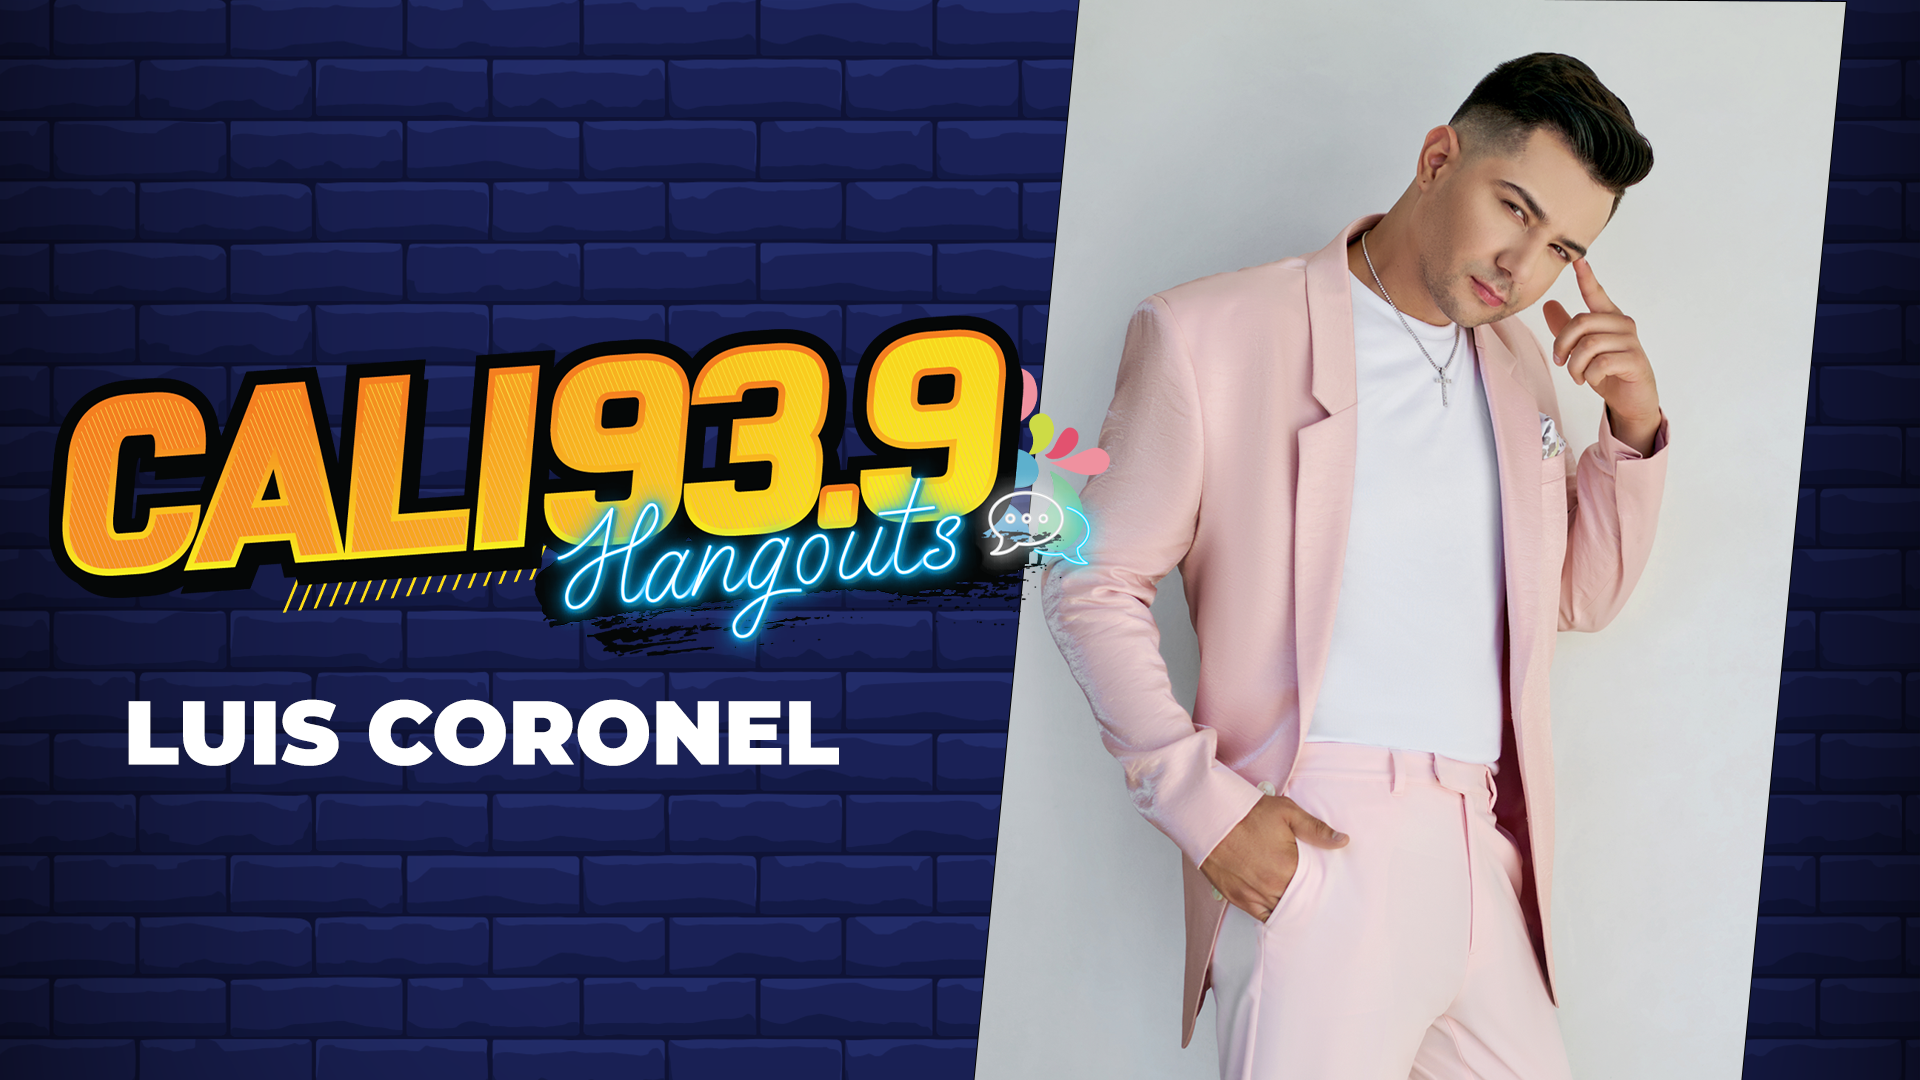 Luis Coronel Gives Advice On All Things Entertainment Industry, “It’s A Rollercoaster”